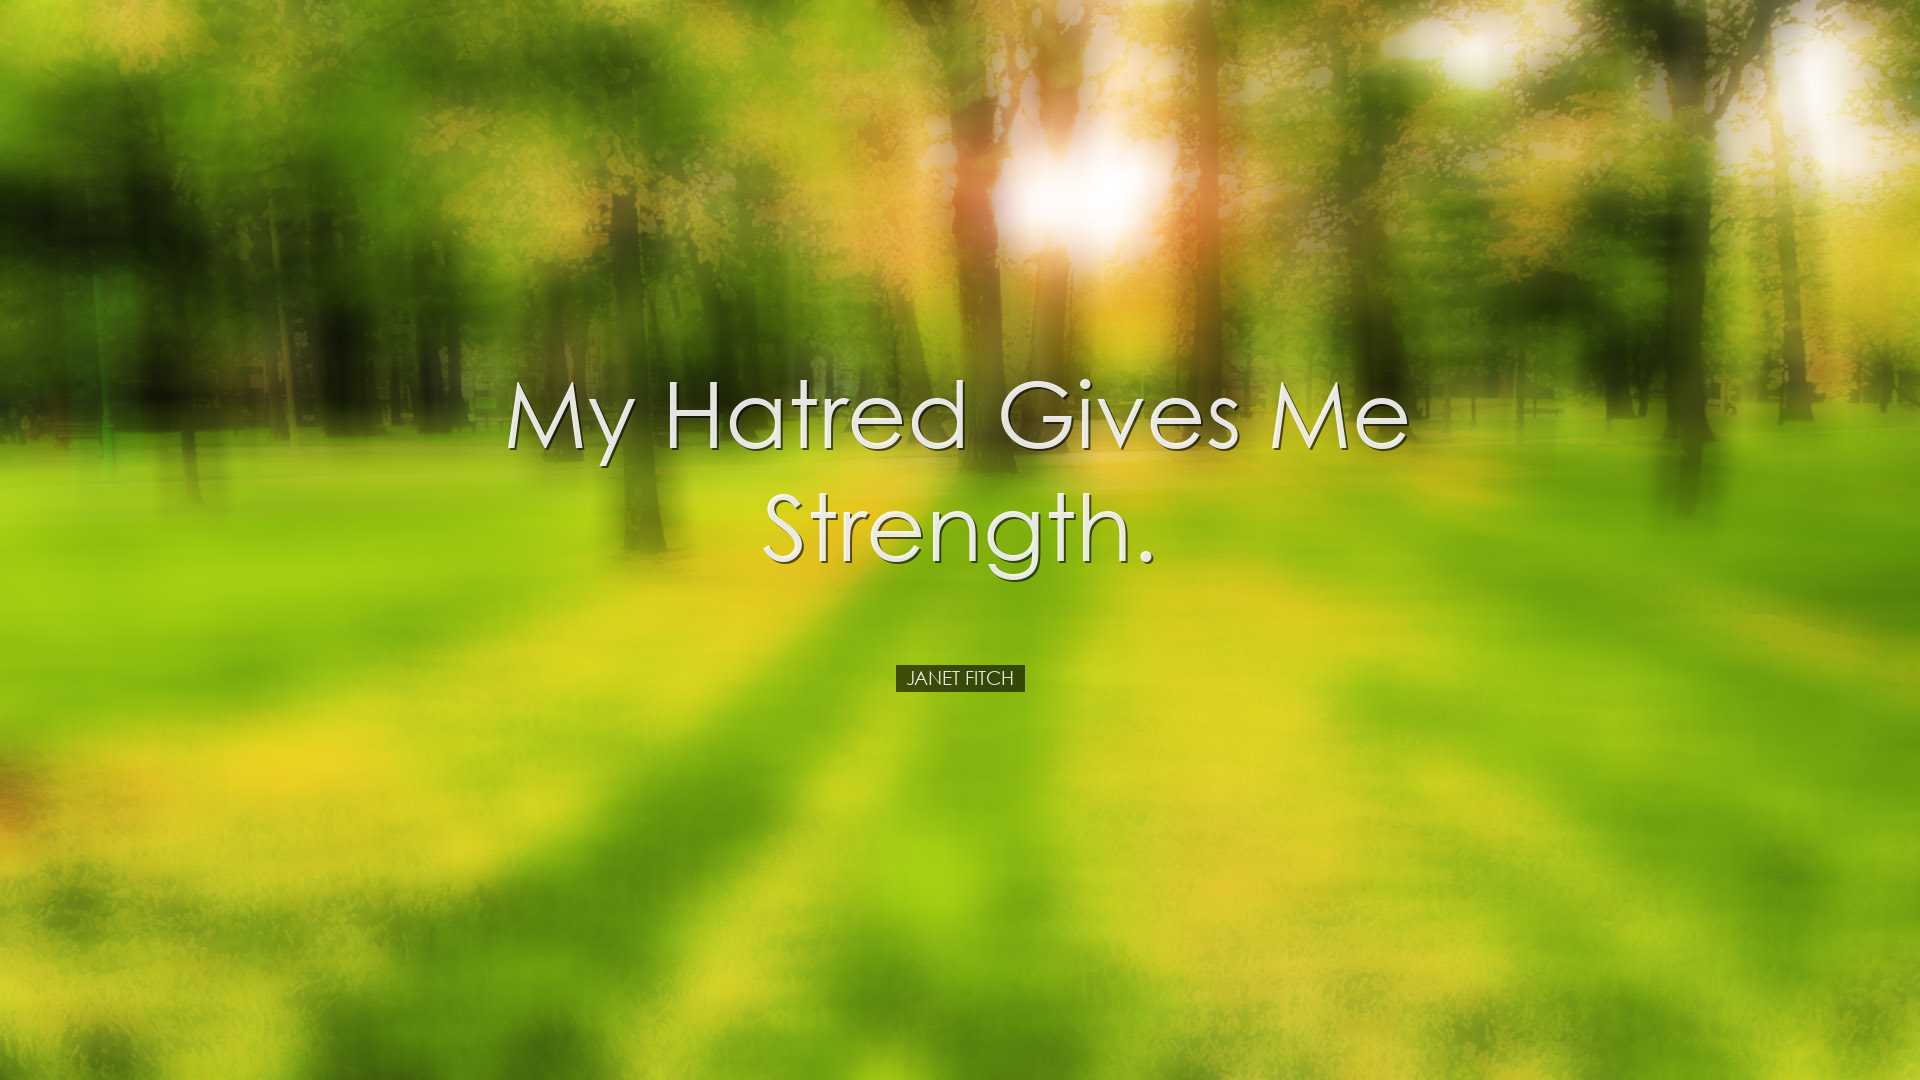 My hatred gives me strength. - Janet Fitch